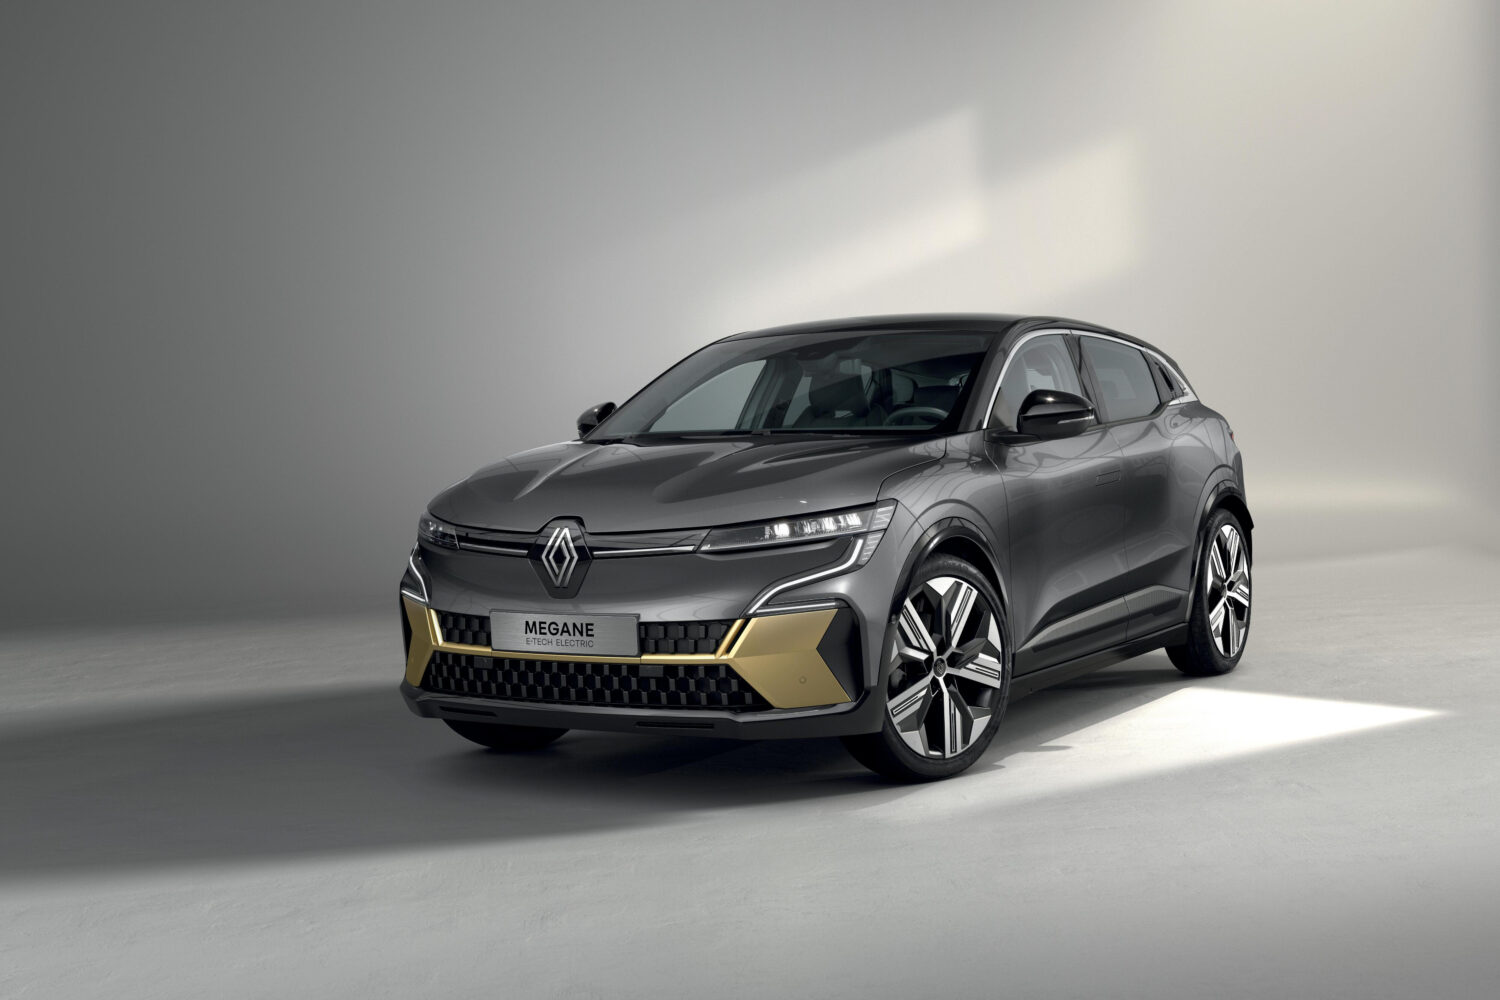 2022 - Story Renault - Colourist: A trade unto its own at Renault Design